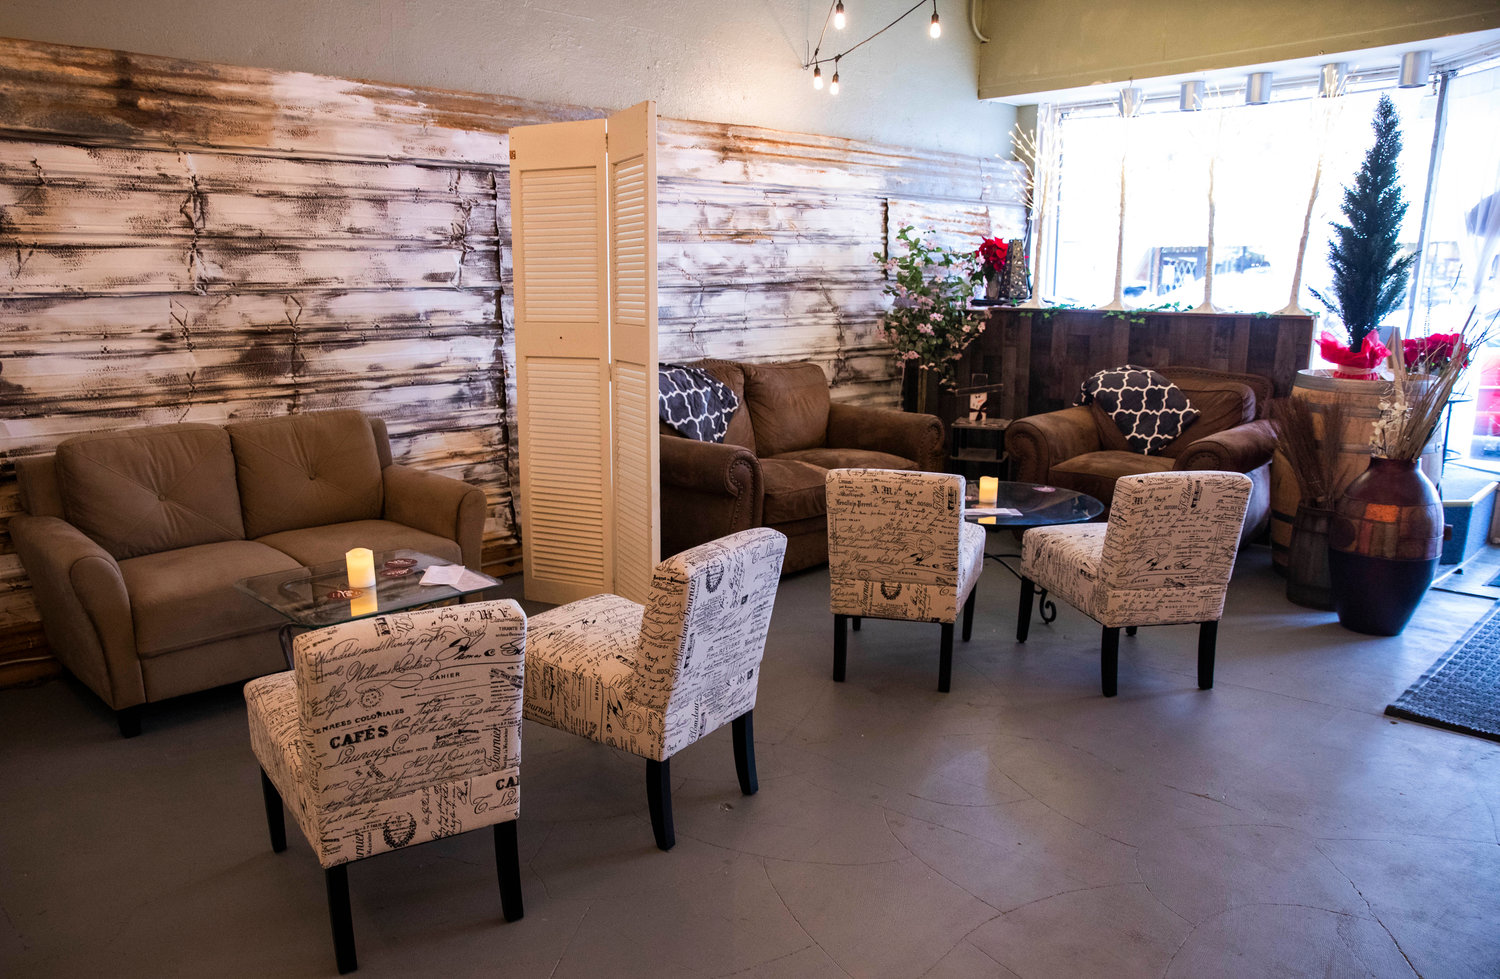 The Luxe Wine Bar features couches, dining tables and 22 varieties of wine to enjoy in downtown Centralia.